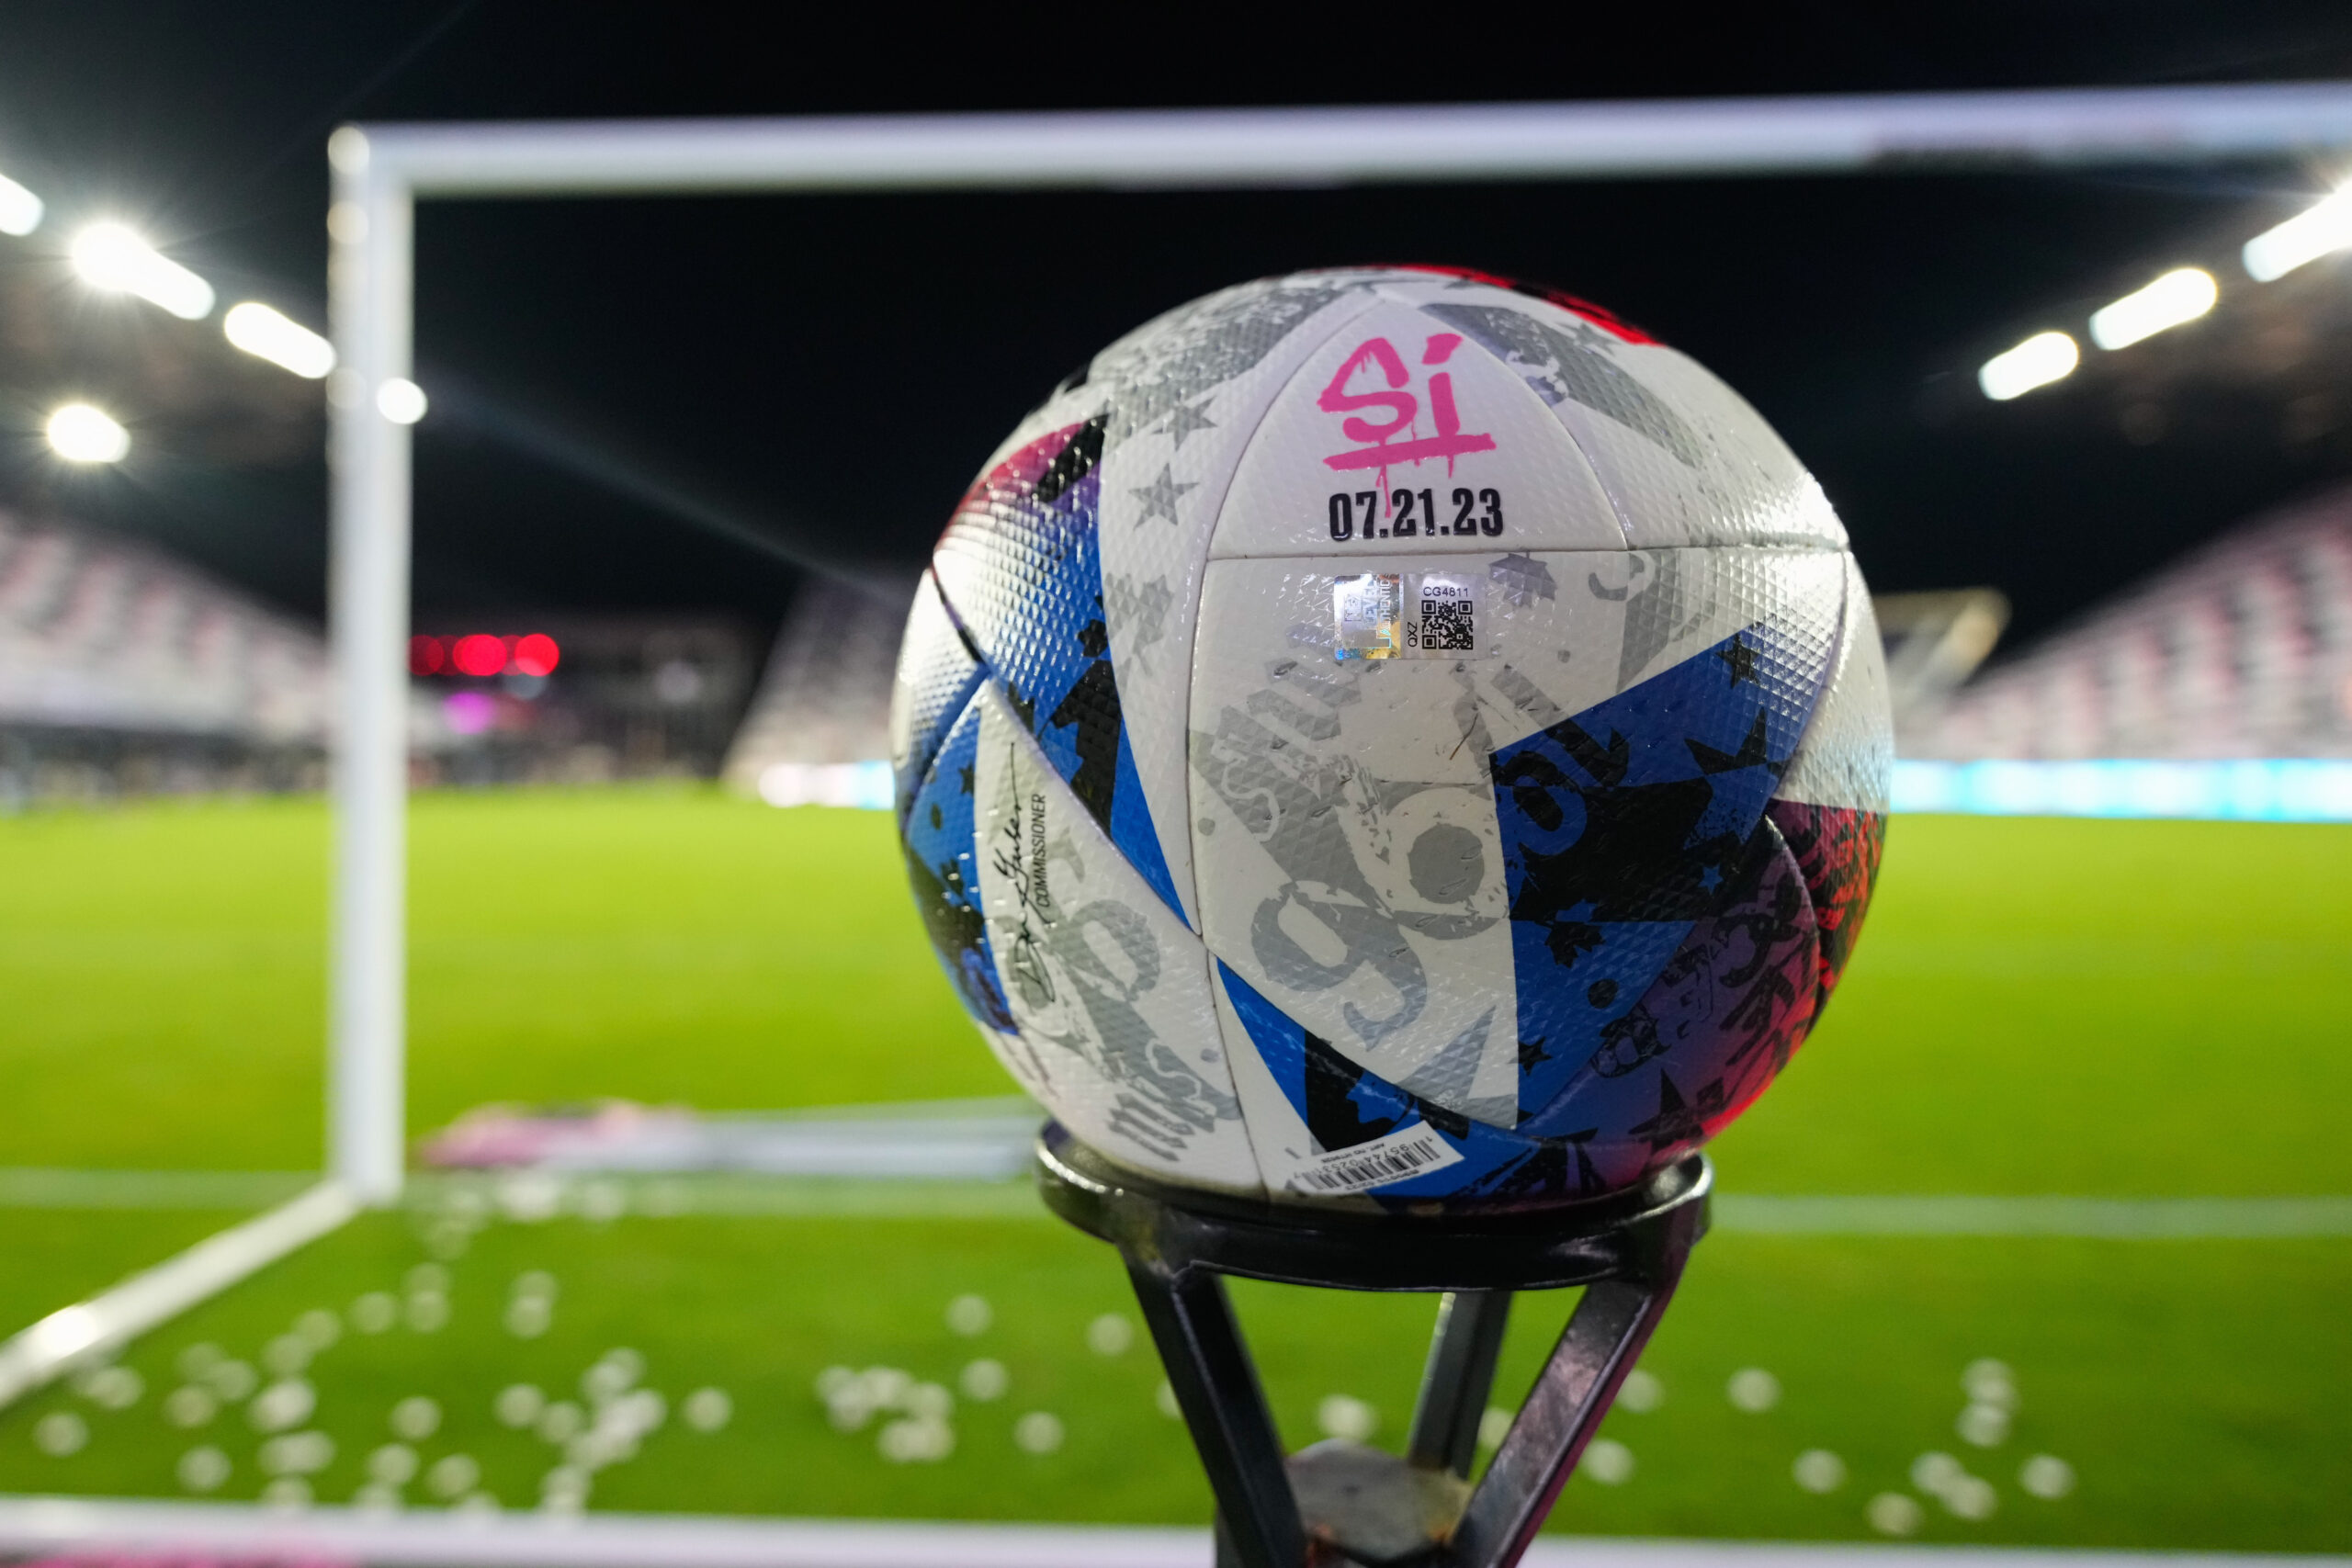 With this ball, #10 Lionel Messi scored his first-ever goal in his first-ever match with Inter Miami CF and MLS.